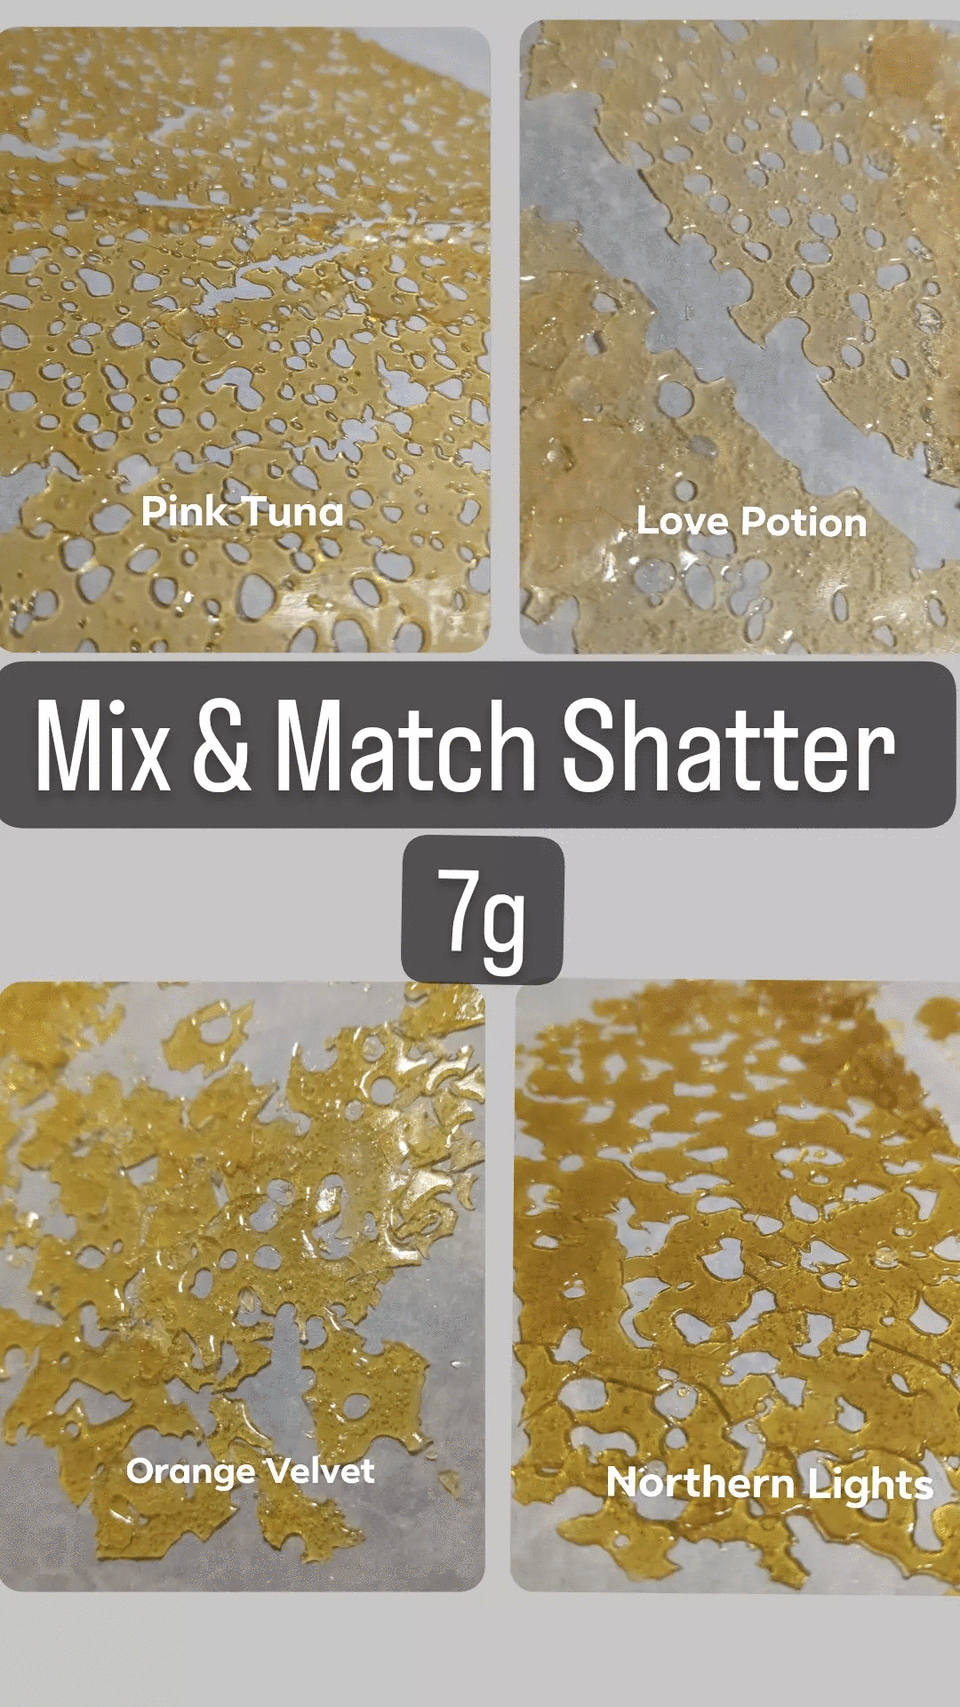 Shatter Mix and Match (7g)